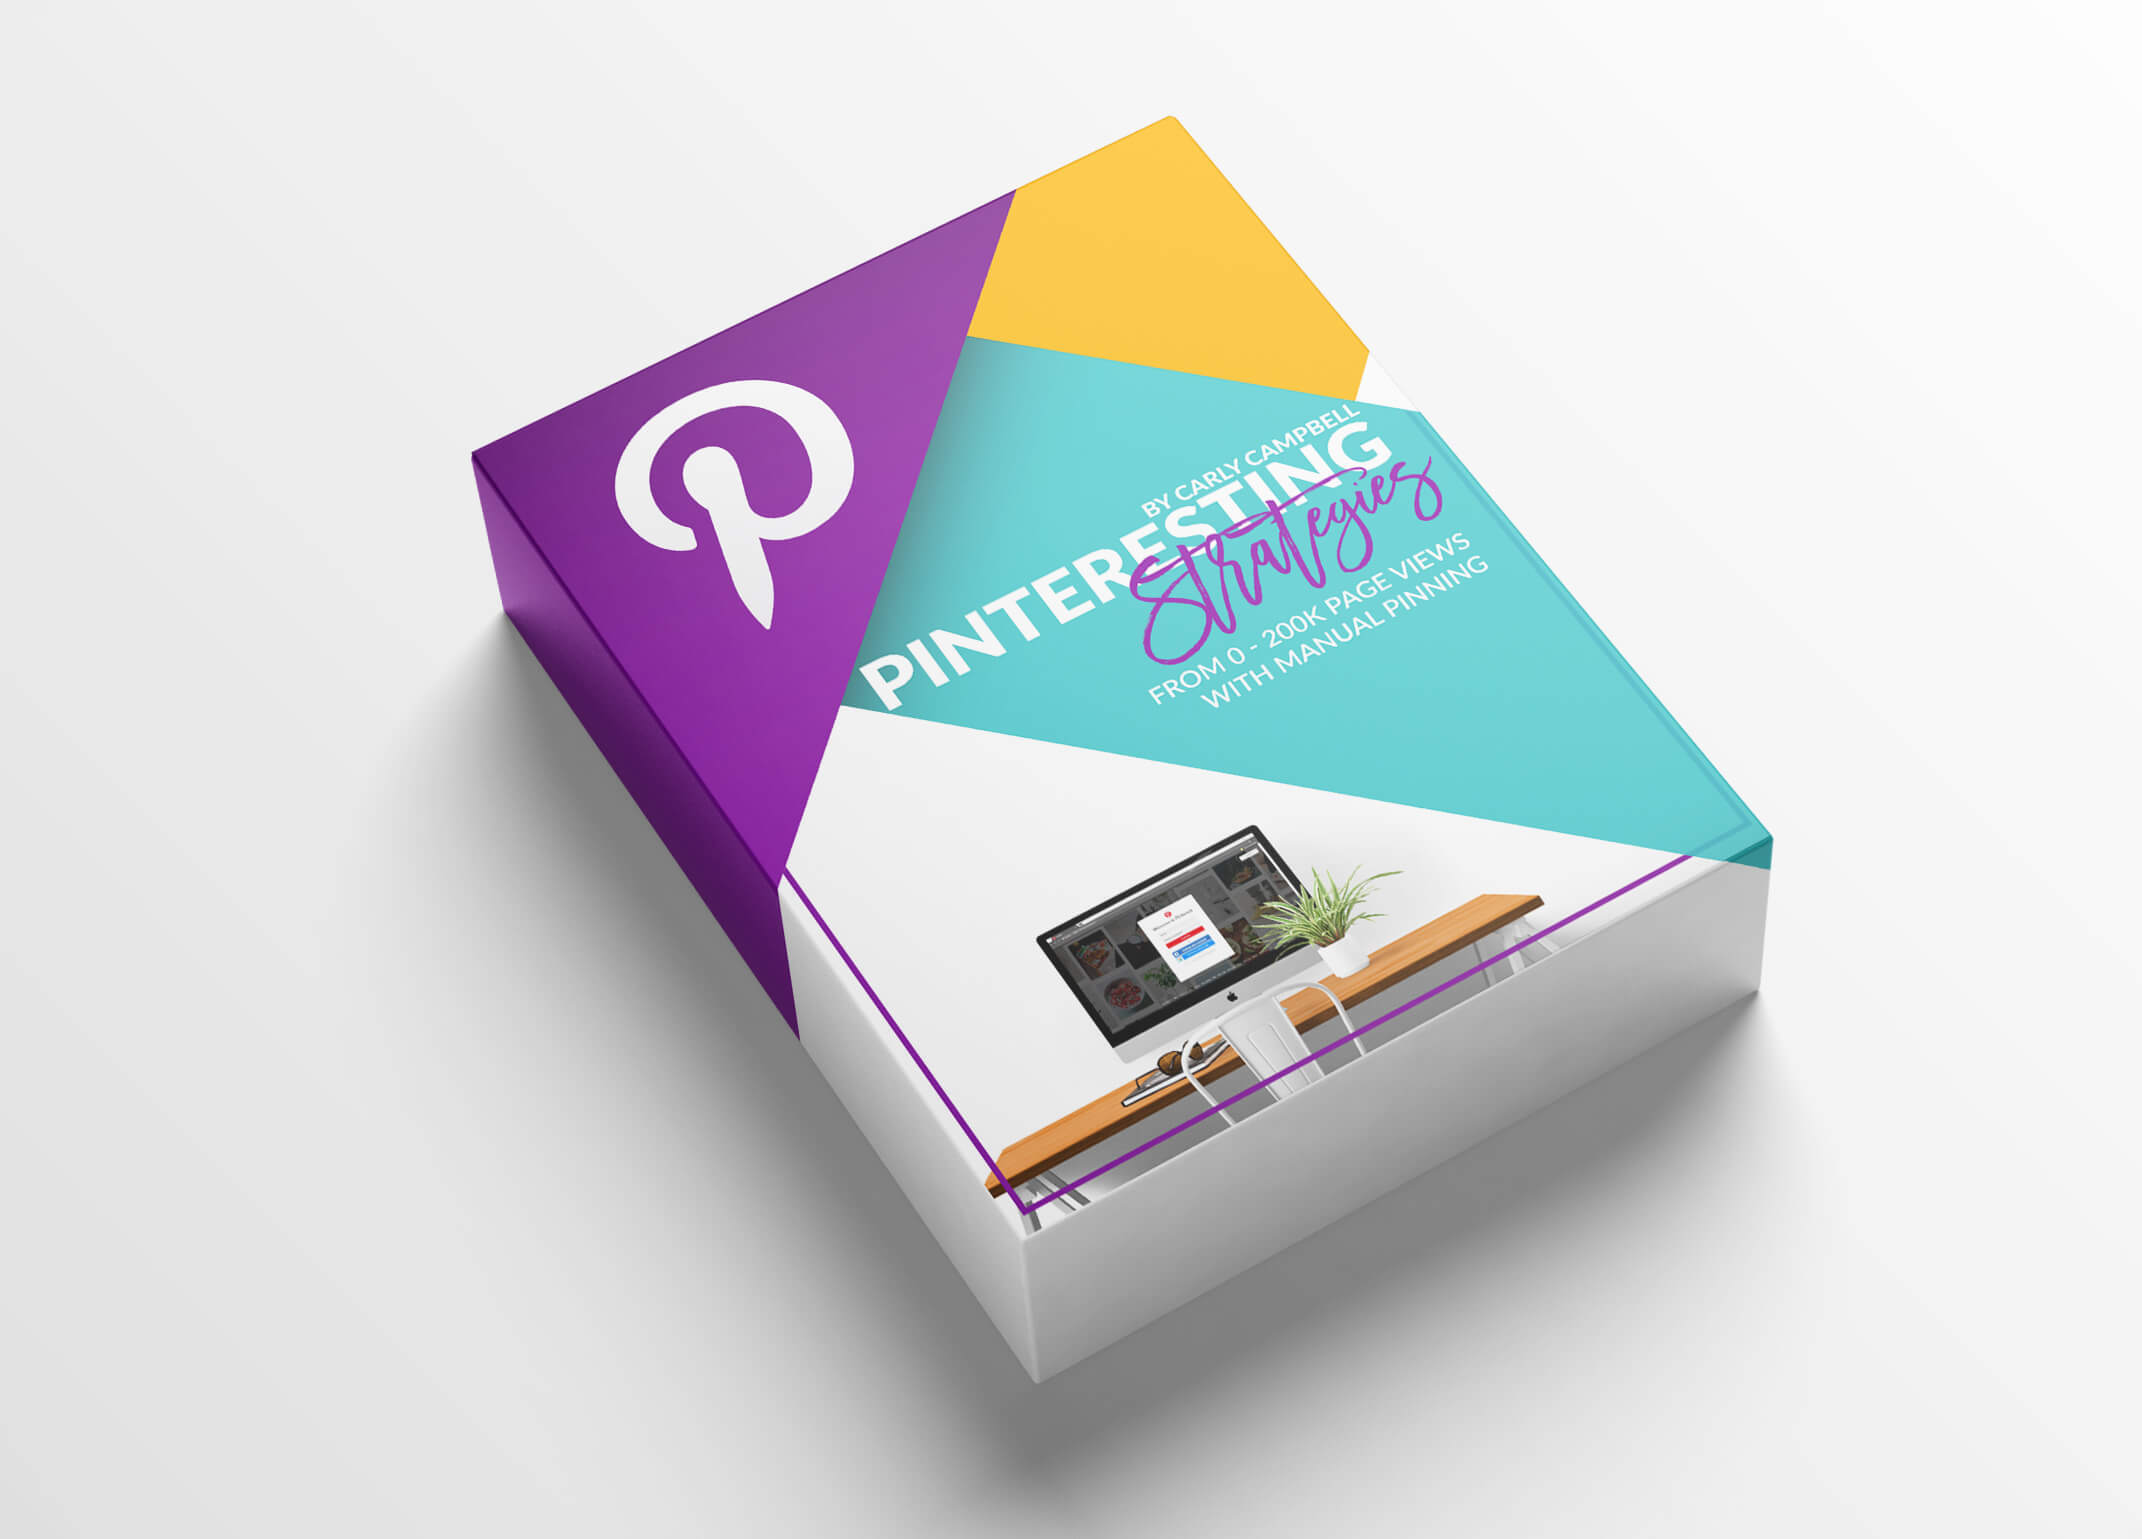 Pinteresting Strategies Review - The best value Pinterest marketing course out there. Here are my results 